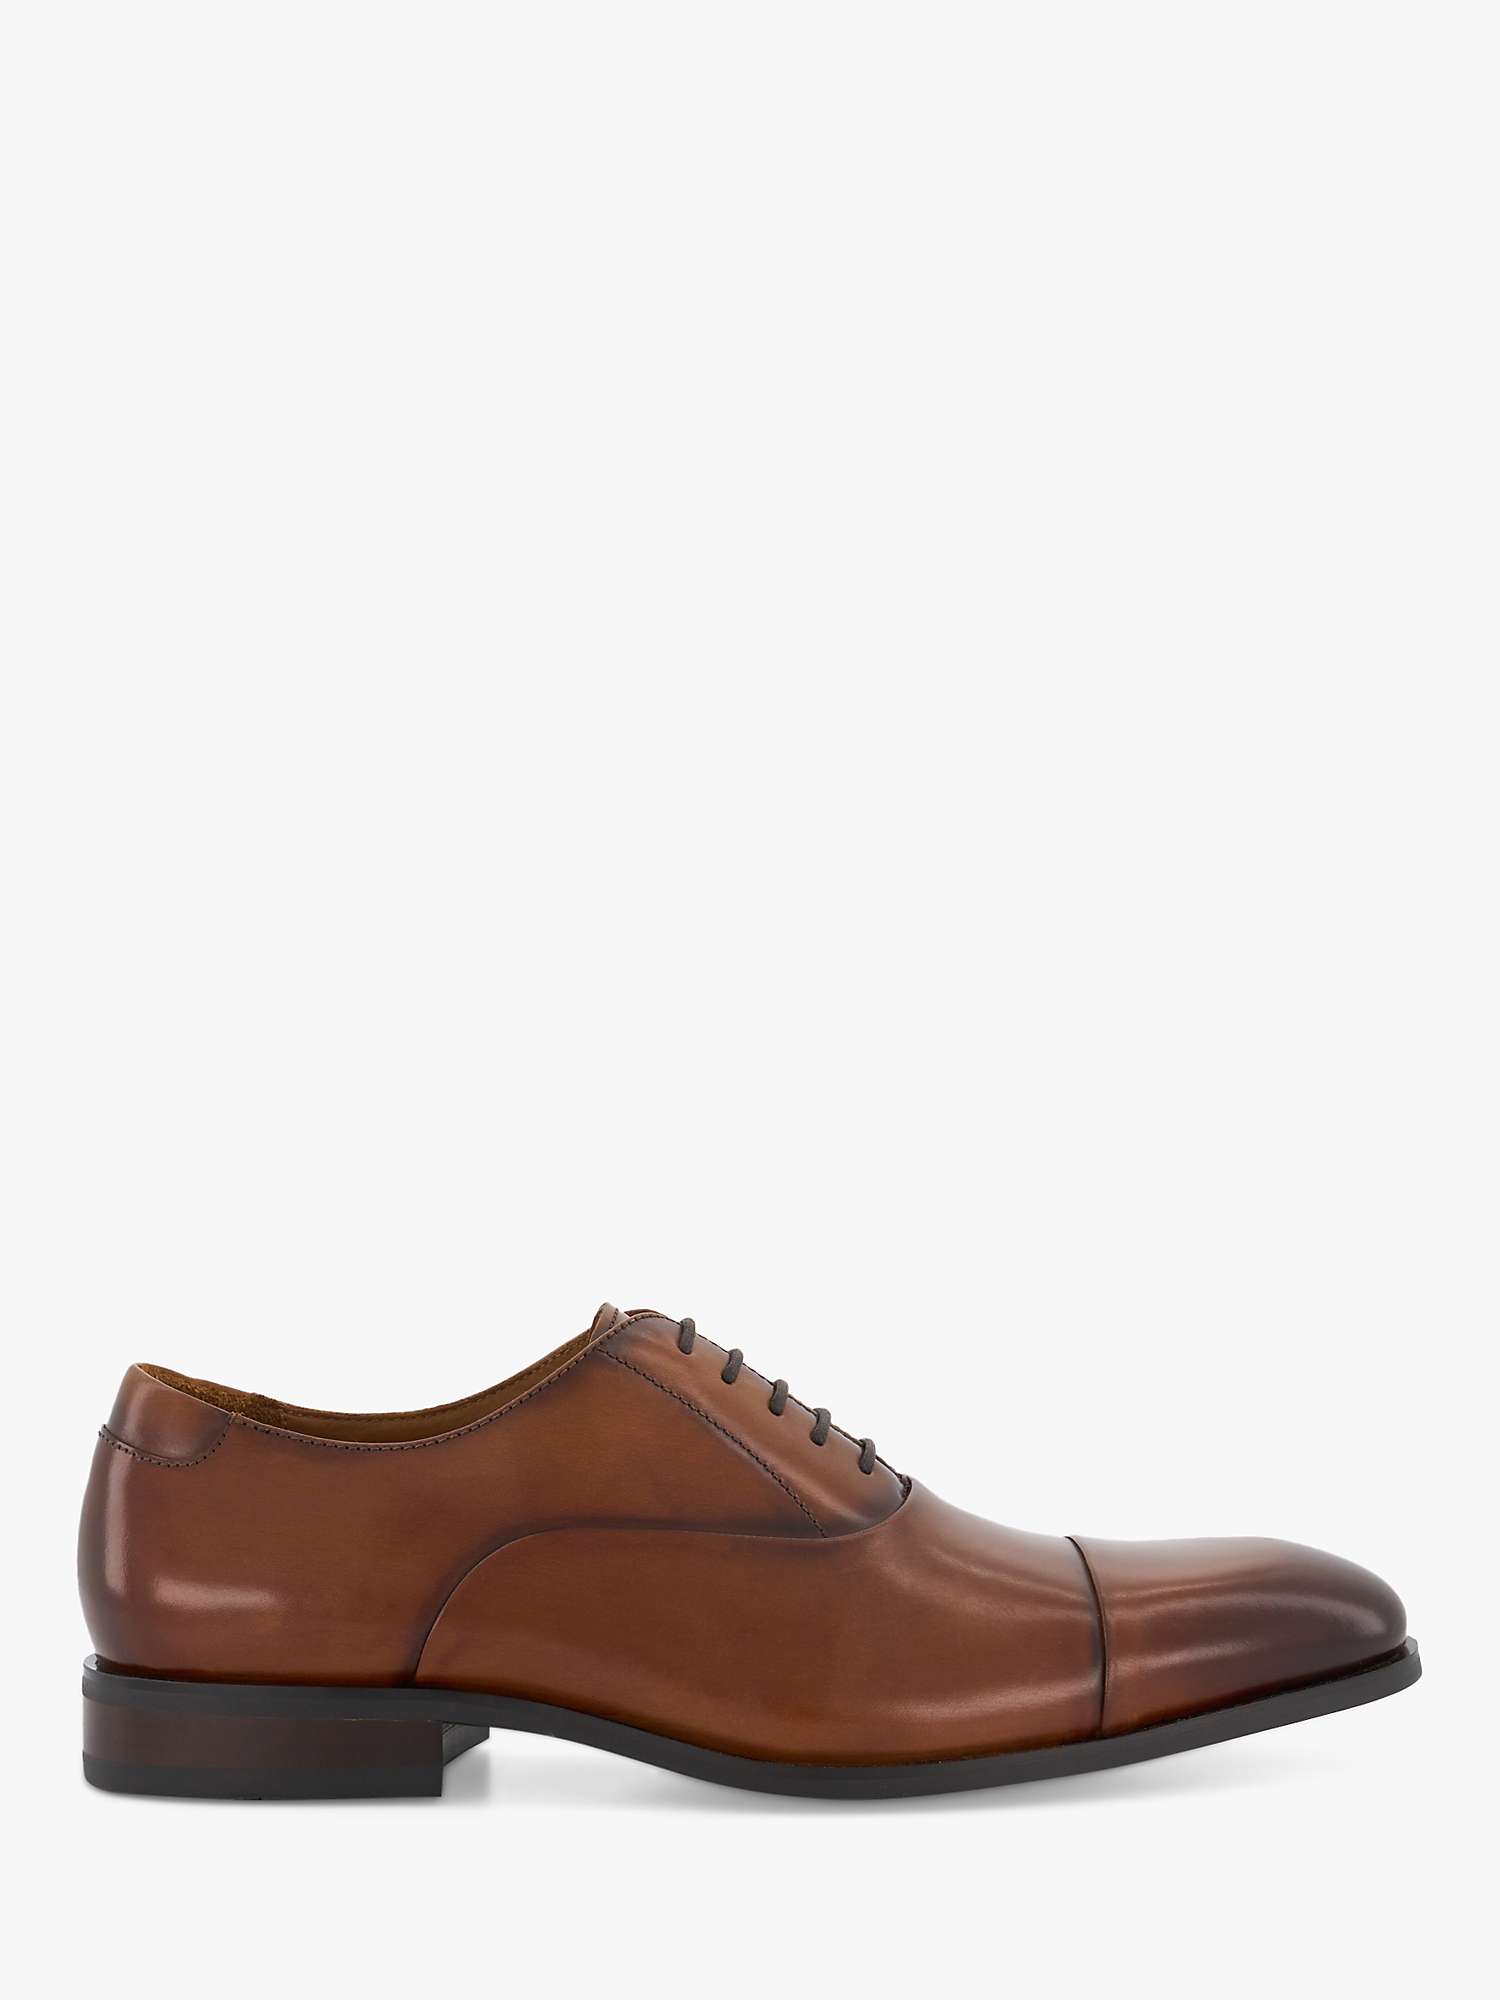 Buy Dune Secrecy Leather Oxford Shoes, Dark Tan-leather Online at johnlewis.com